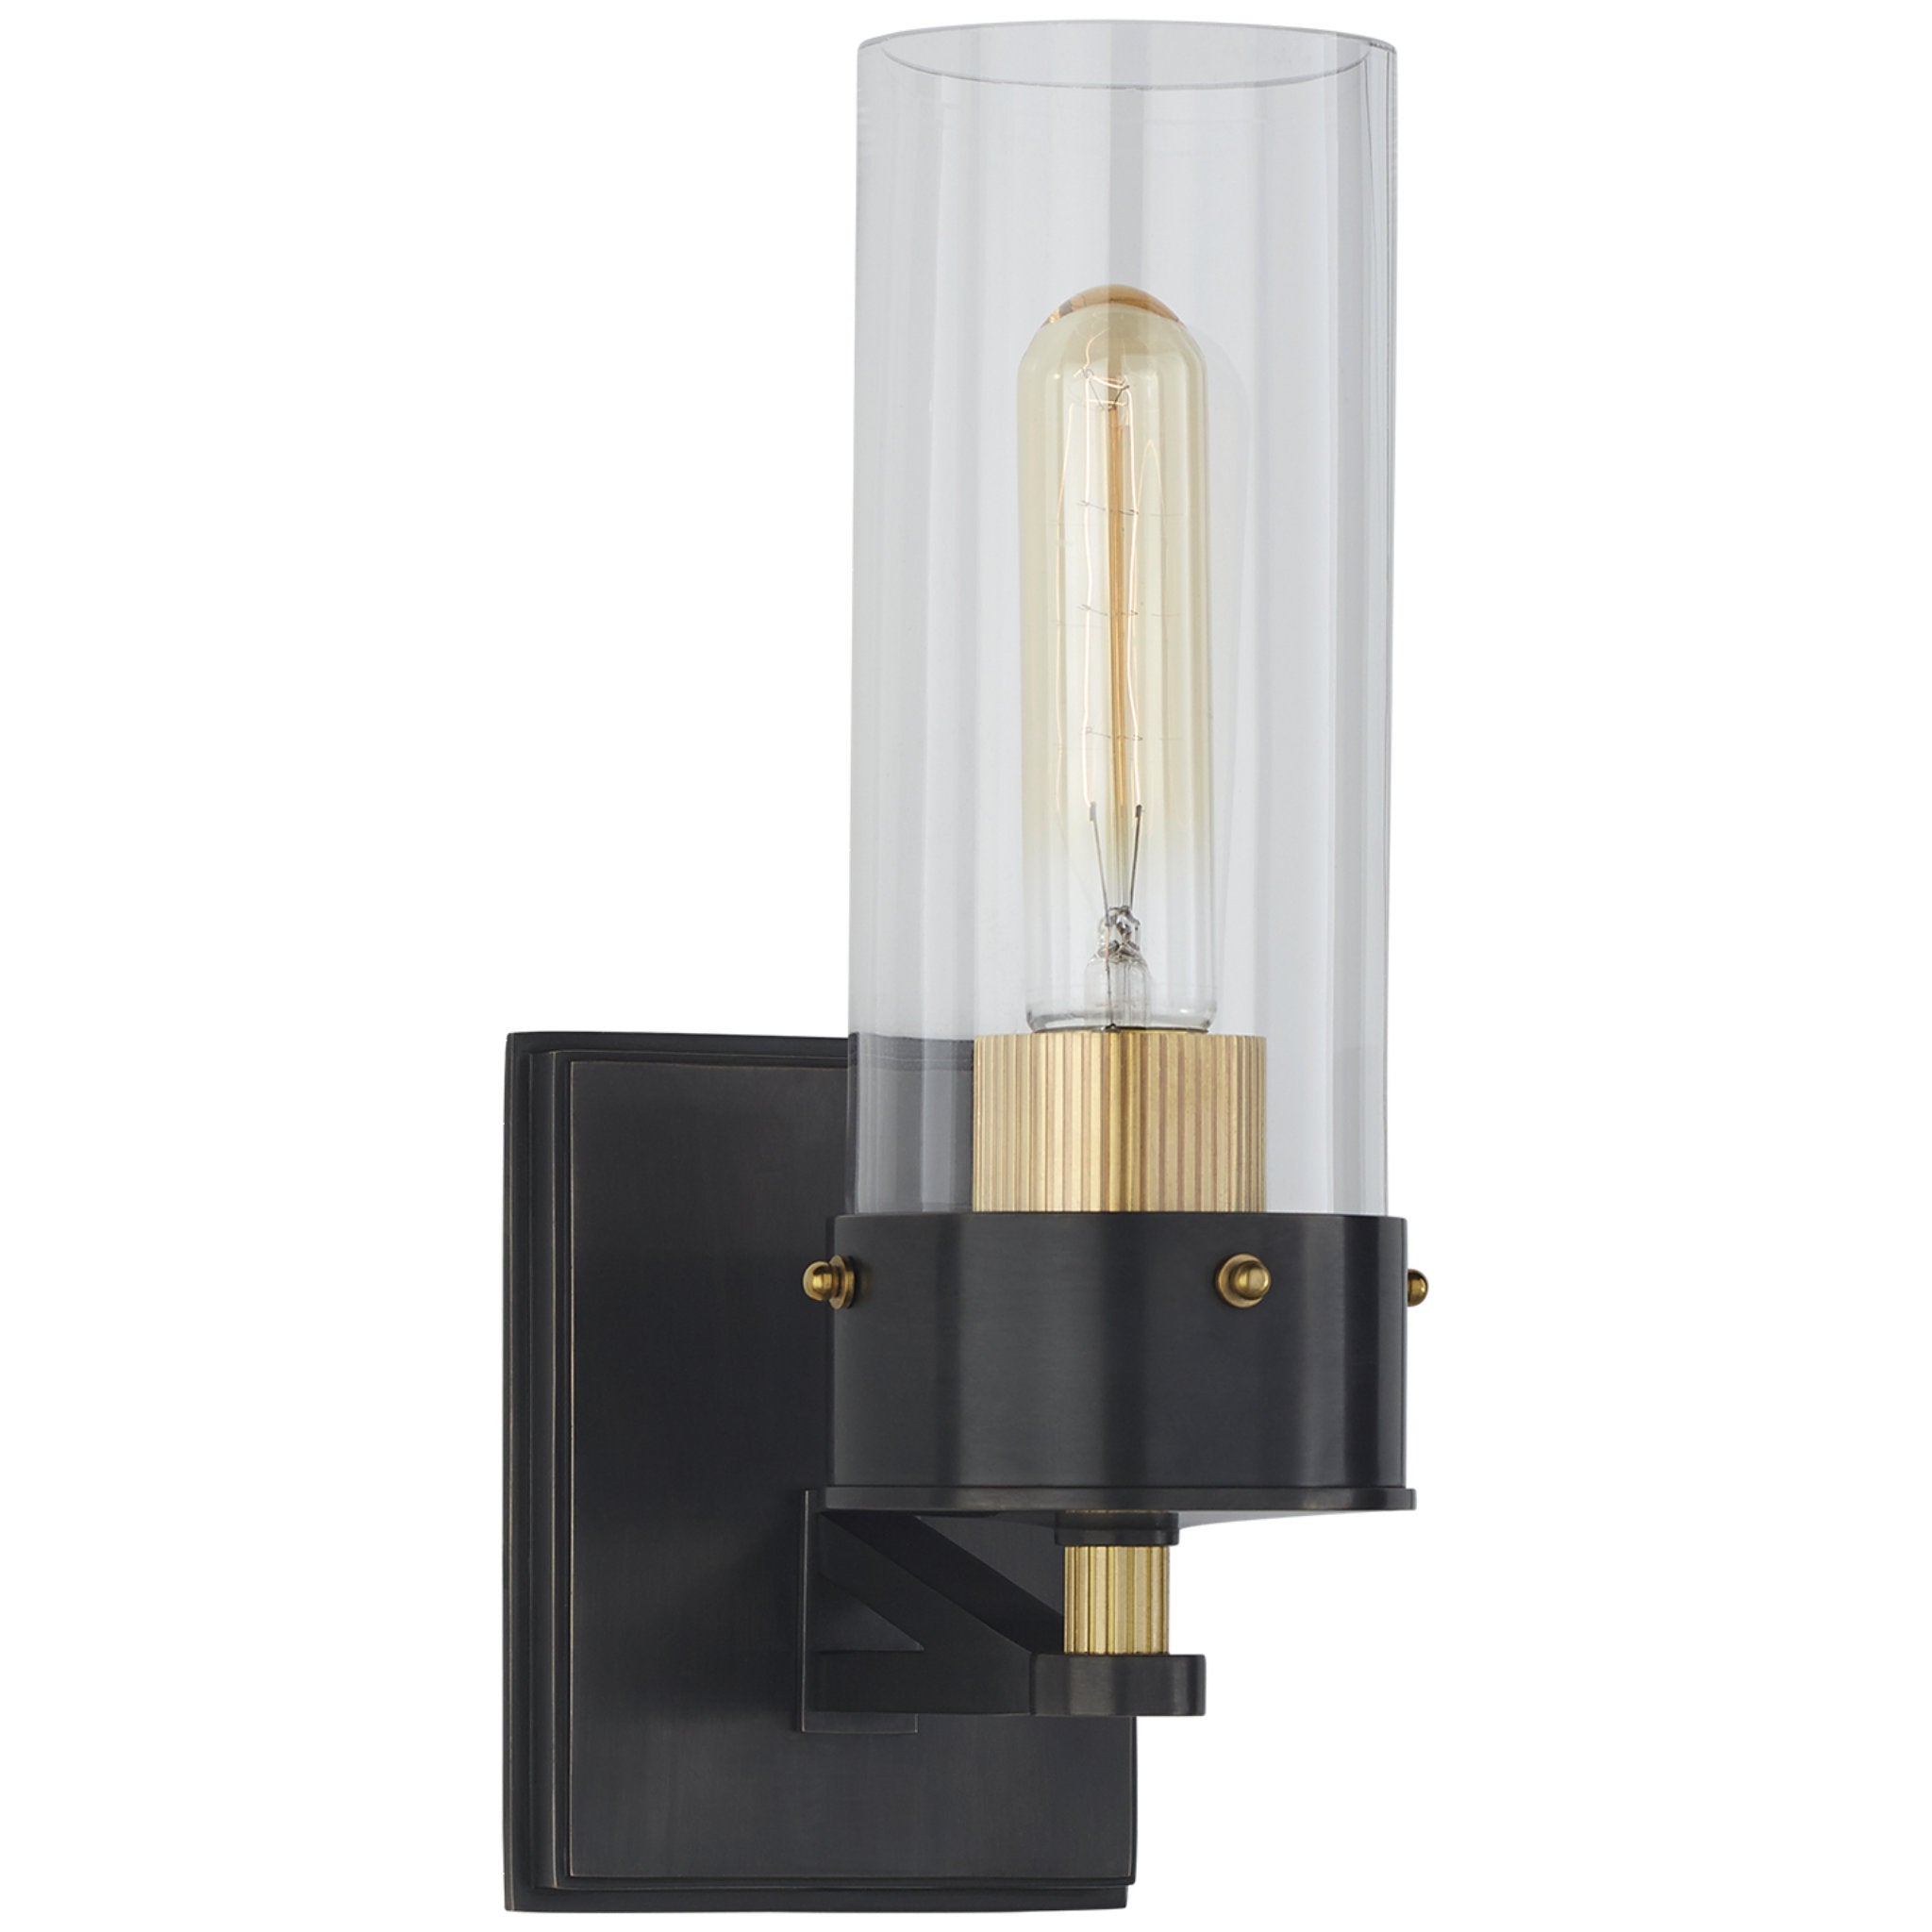 Thomas O'Brien Marais Medium Bath Sconce in Bronze and Hand-Rubbed Antique Brass with Clear Glass